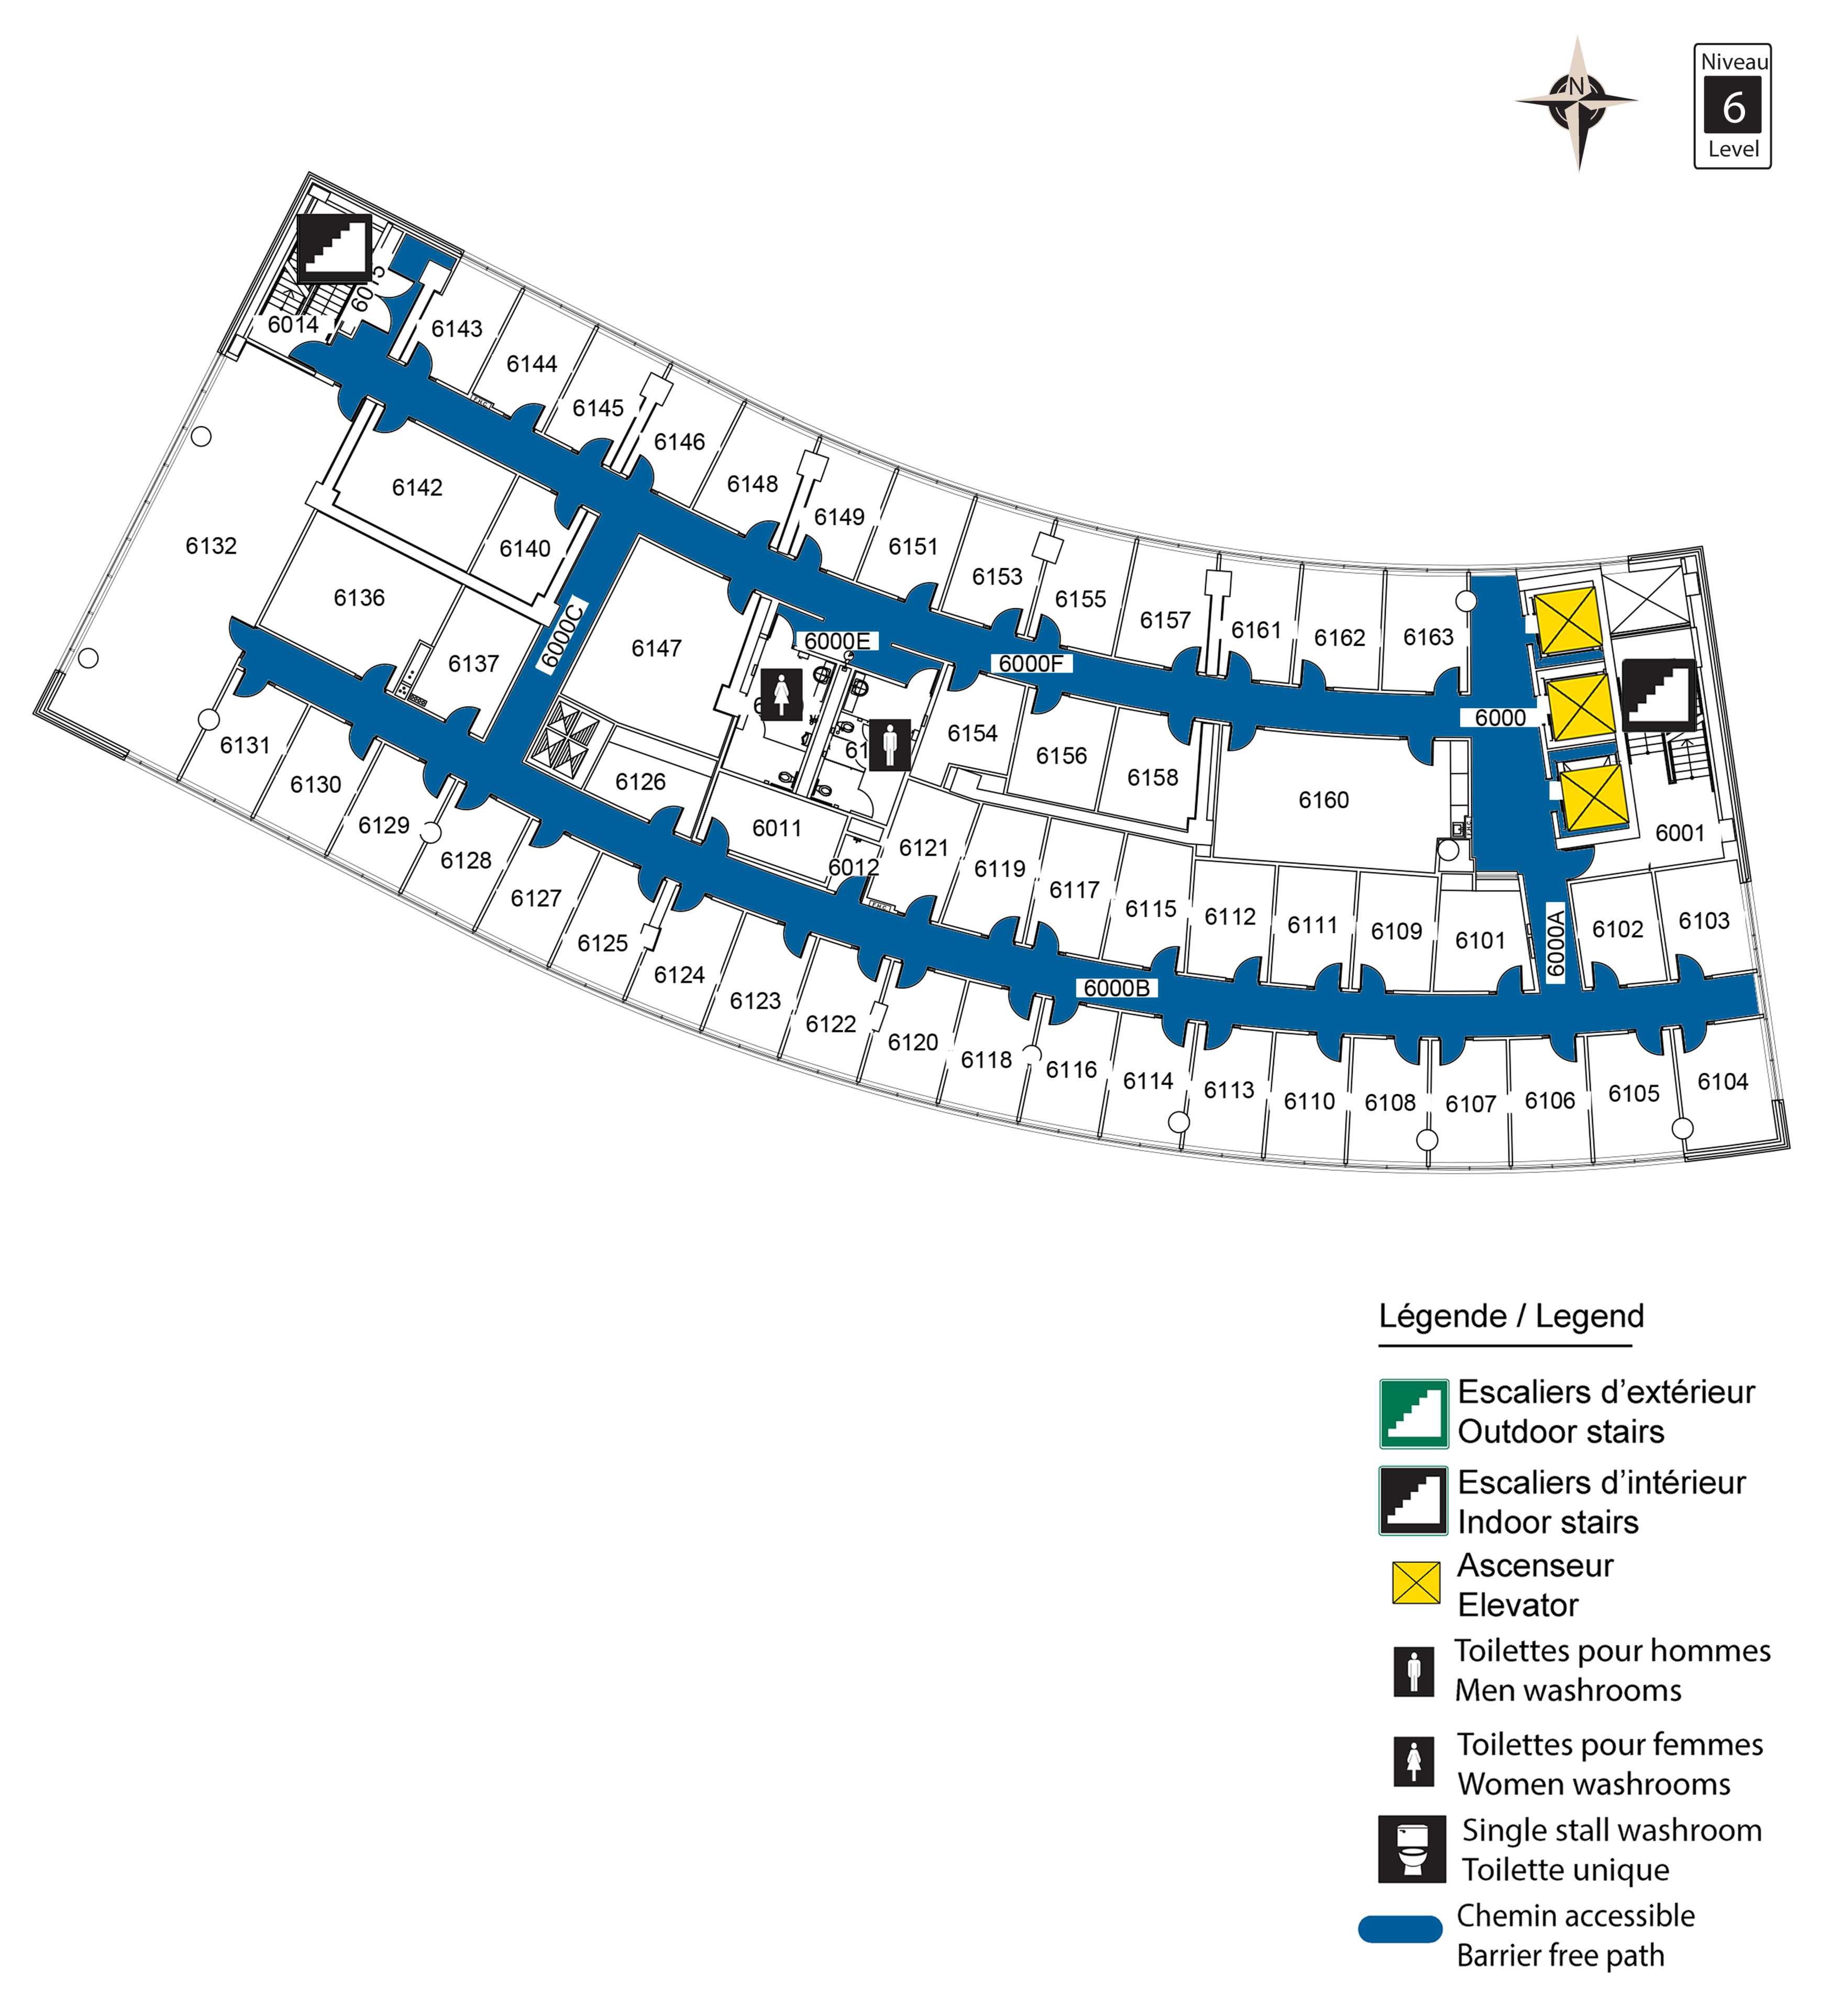 Accessible map - DMS level 6